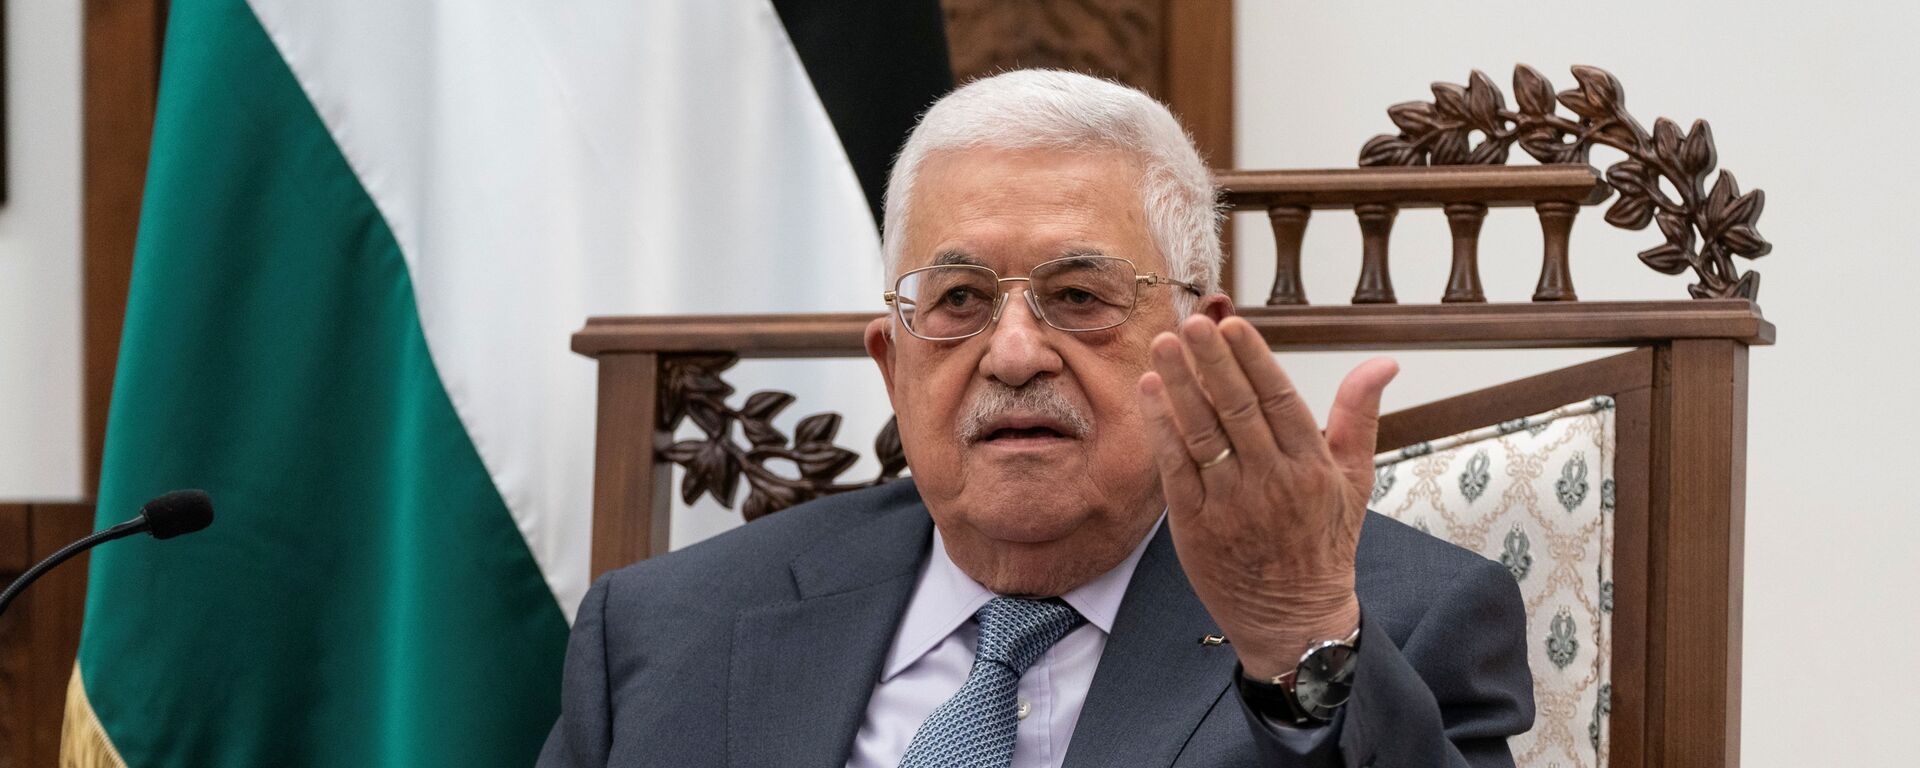 Palestinian President Mahmoud Abbas speaks during a joint press conference with U.S. Secretary of State Antony Blinken (not pictured), in the West Bank city of Ramallah, May 25, 2021. - Sputnik International, 1920, 29.09.2021